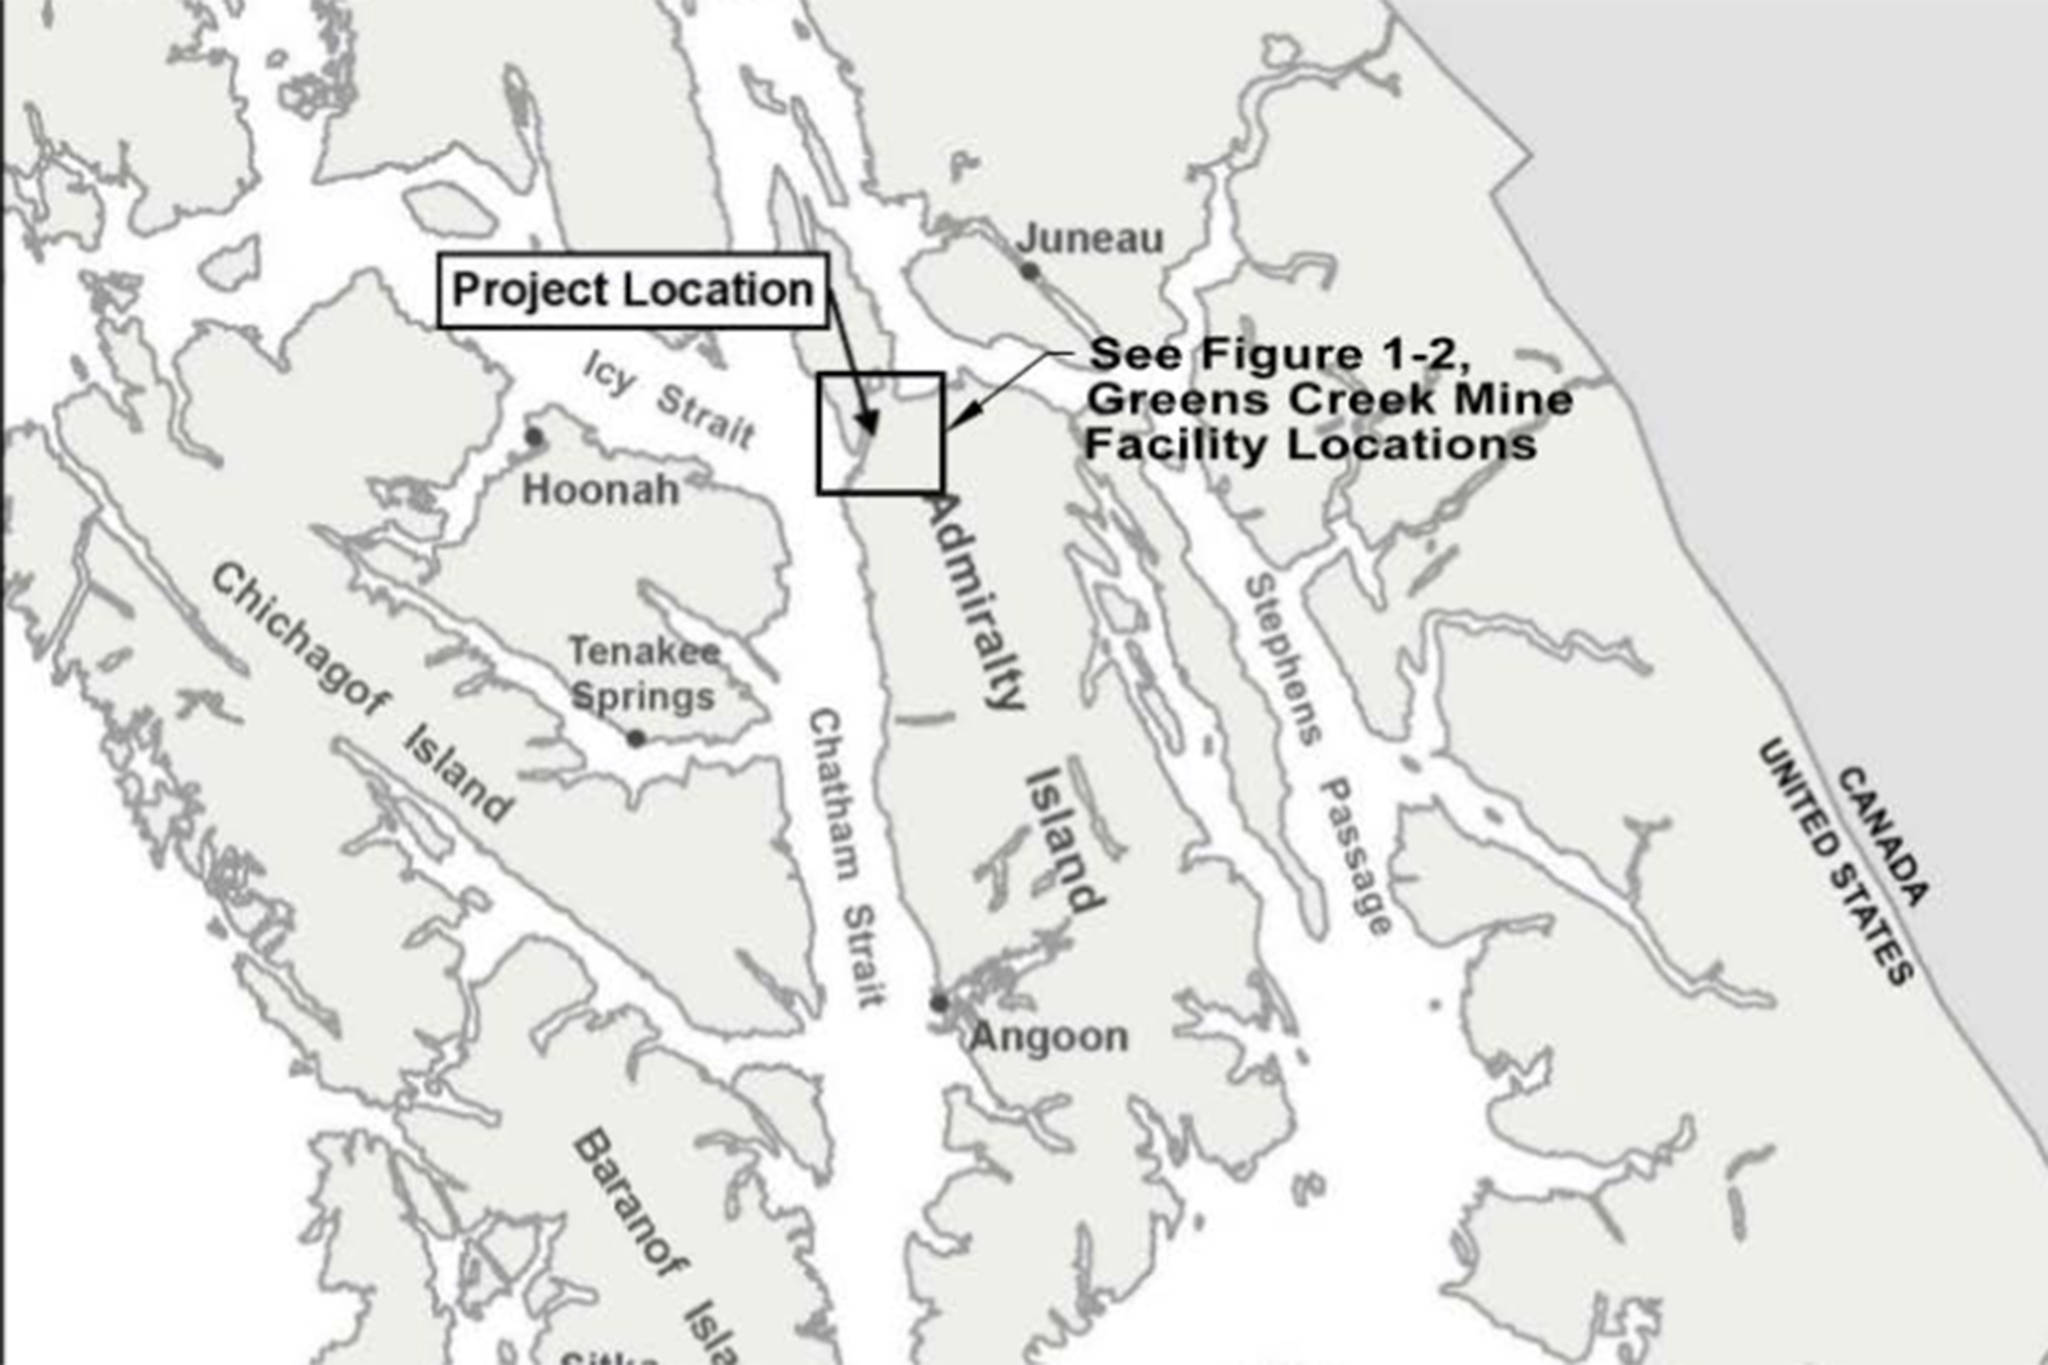 Courtesy Image / U.S Forest ServiceThis image shows the location of the proposed Hecla Greens Creek Mine extension.